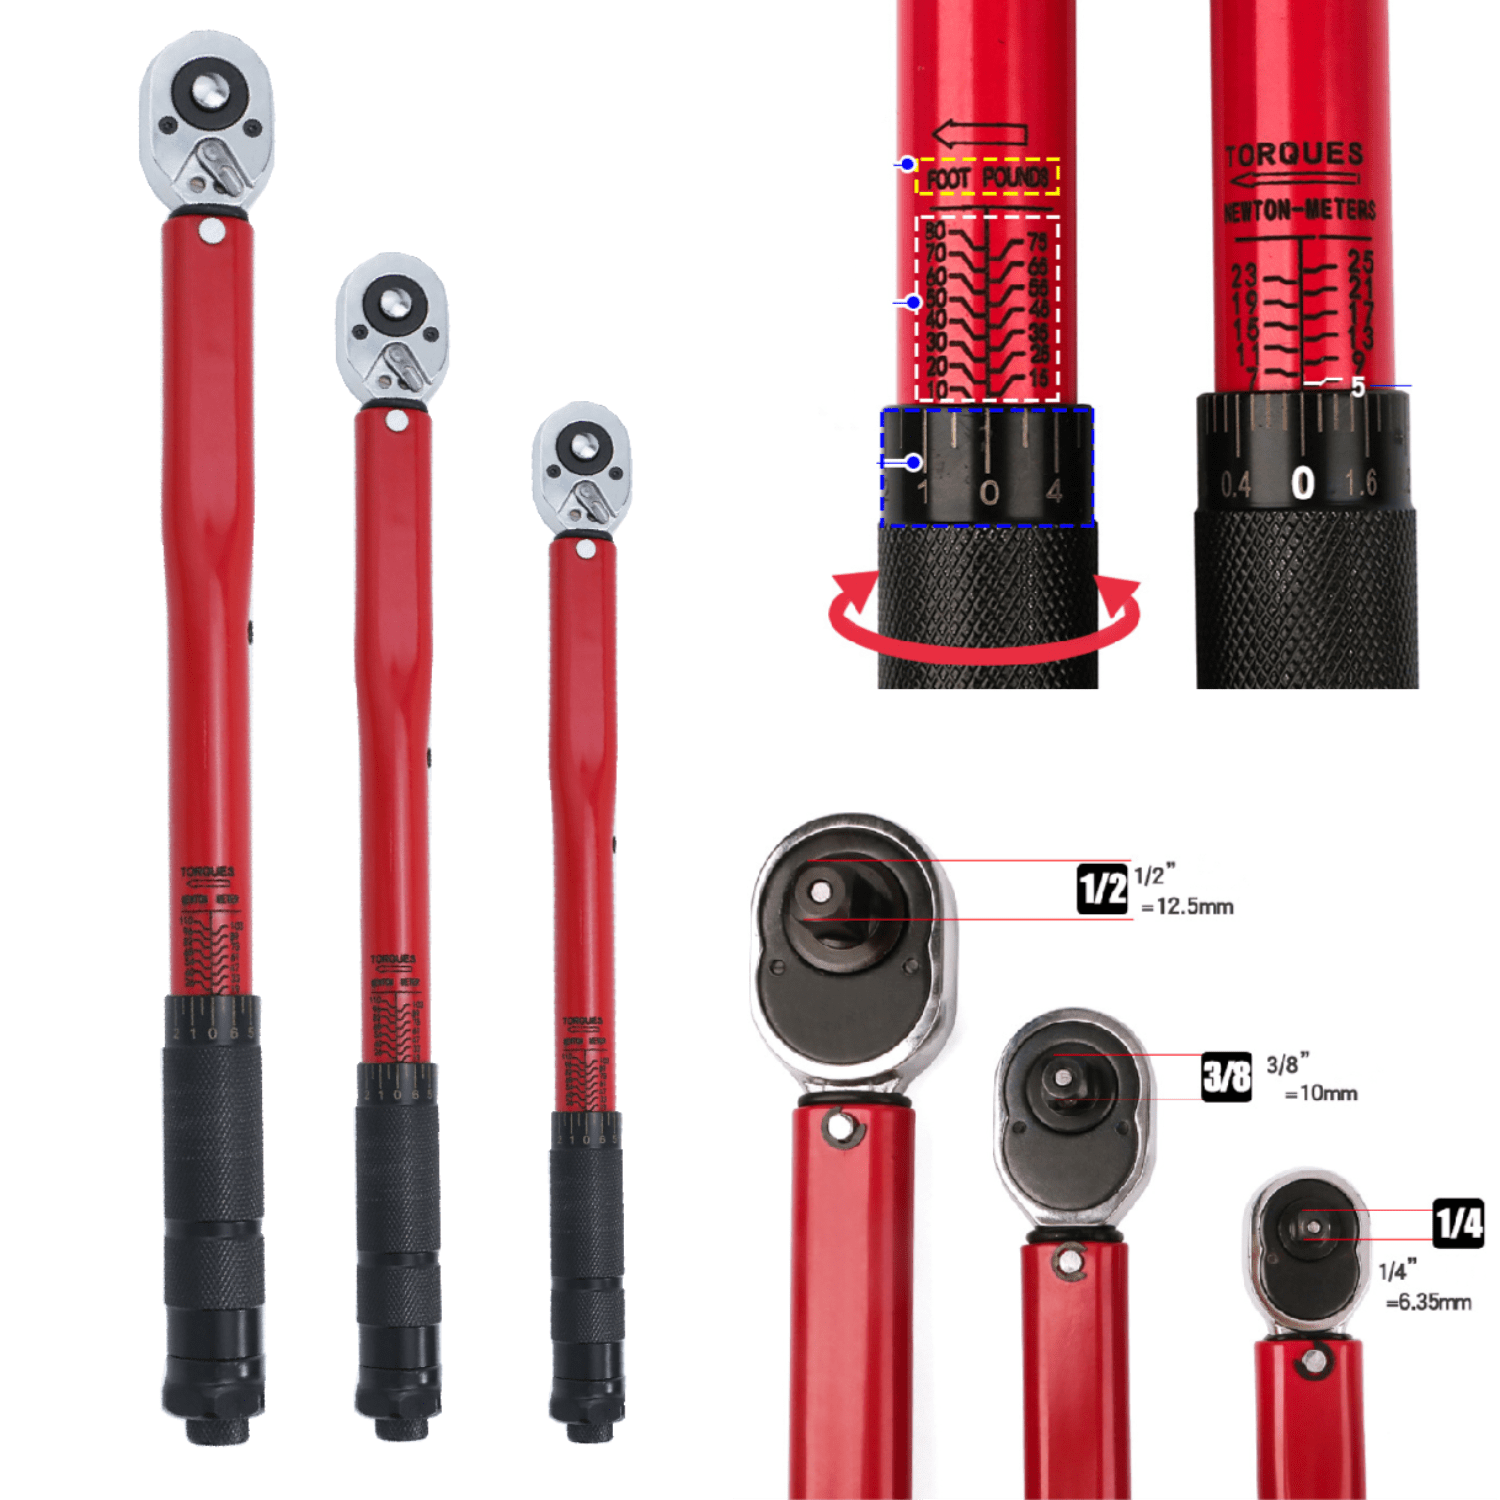 

Precise Ratchet Wrench Key Set - 5-210n.m Torque Wrench Bike 1/4, 3/8 & 1/2 Square Drive Hand Tools